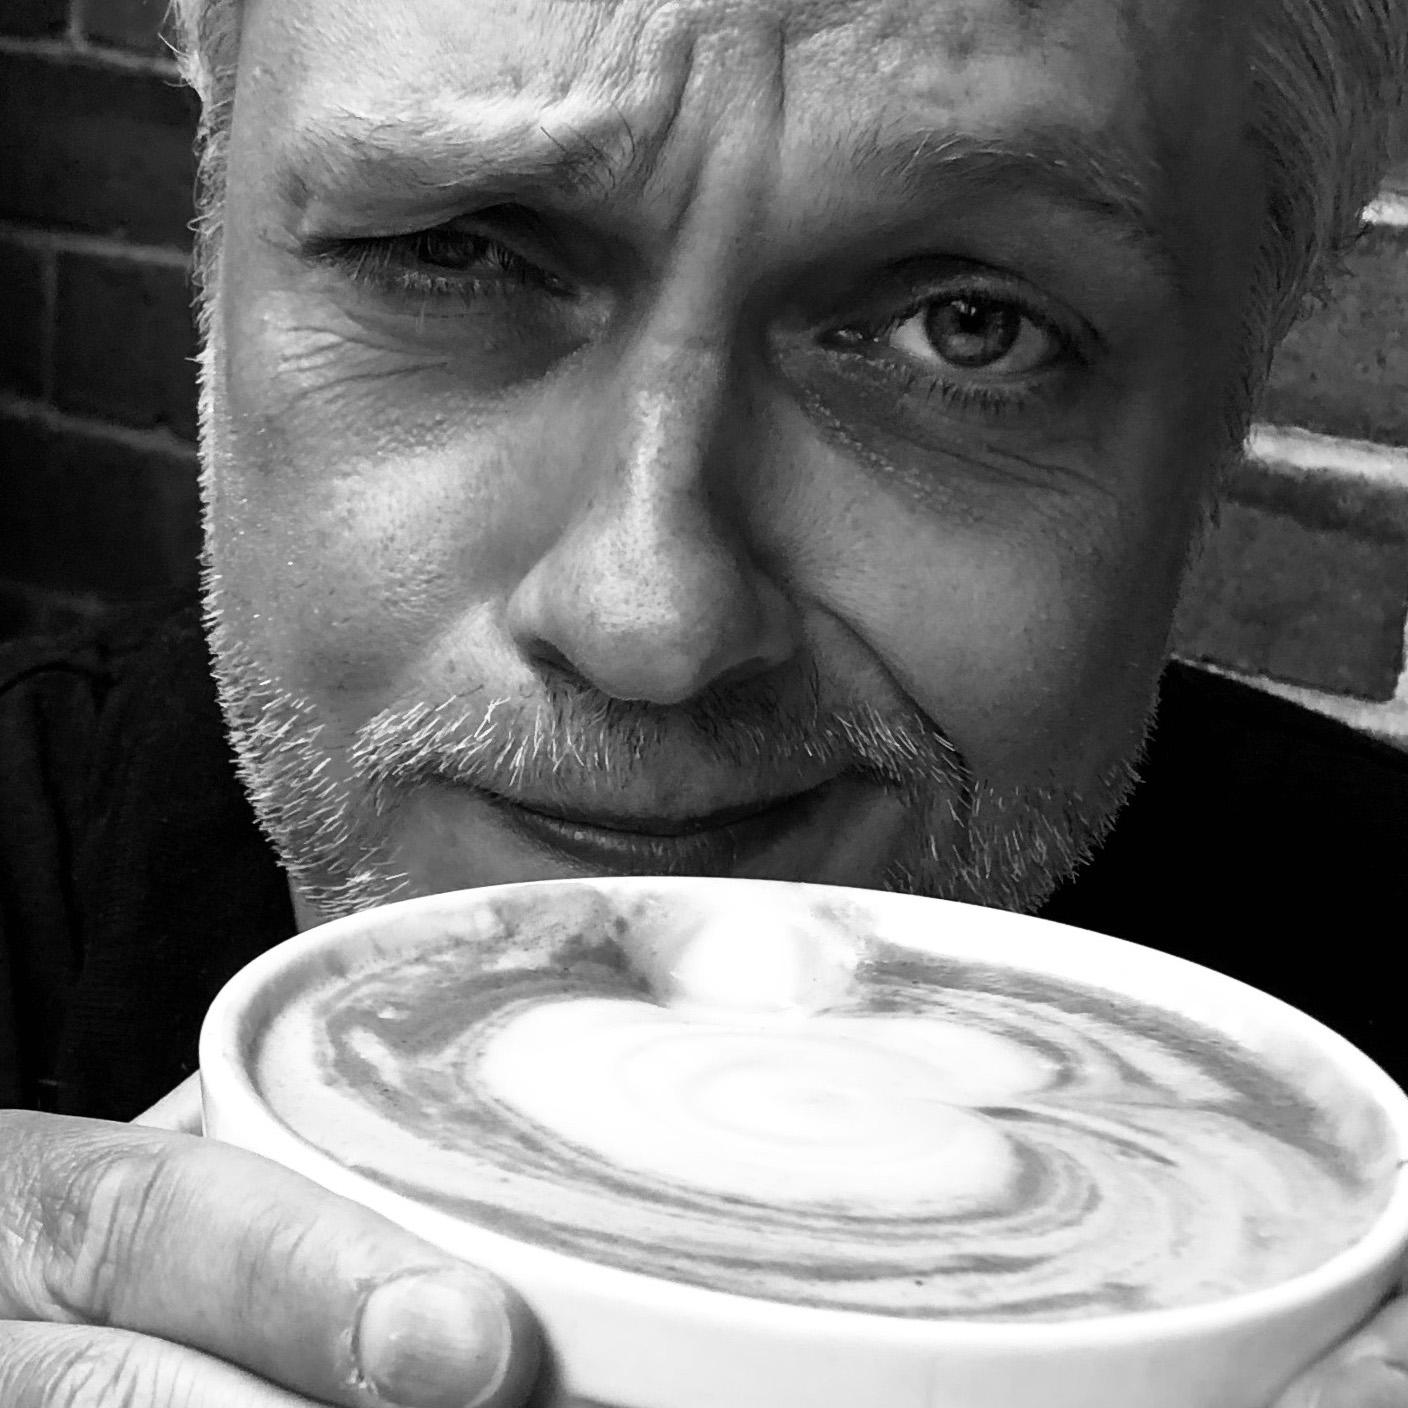 Florian with a cup of coffee